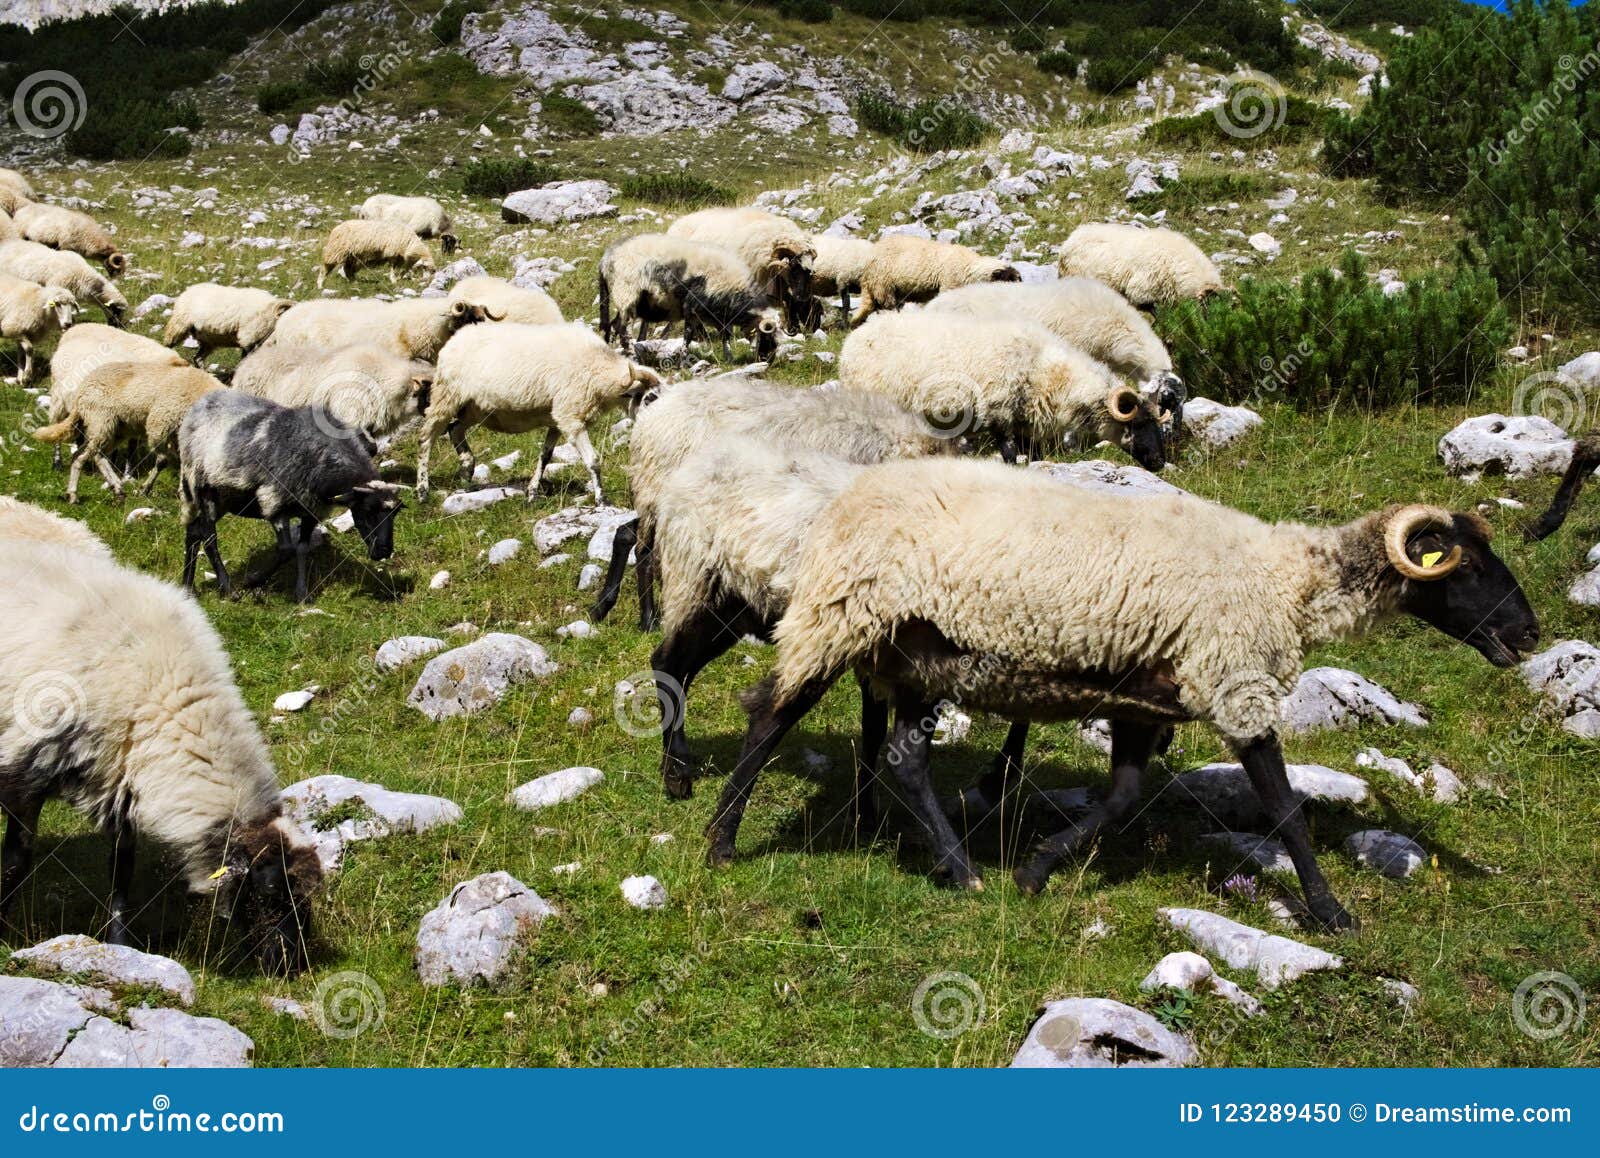 A Herd of Rams on a Rocky Mountain Meadow Stock Photo - Image of durmitor, agriculture: 123289450